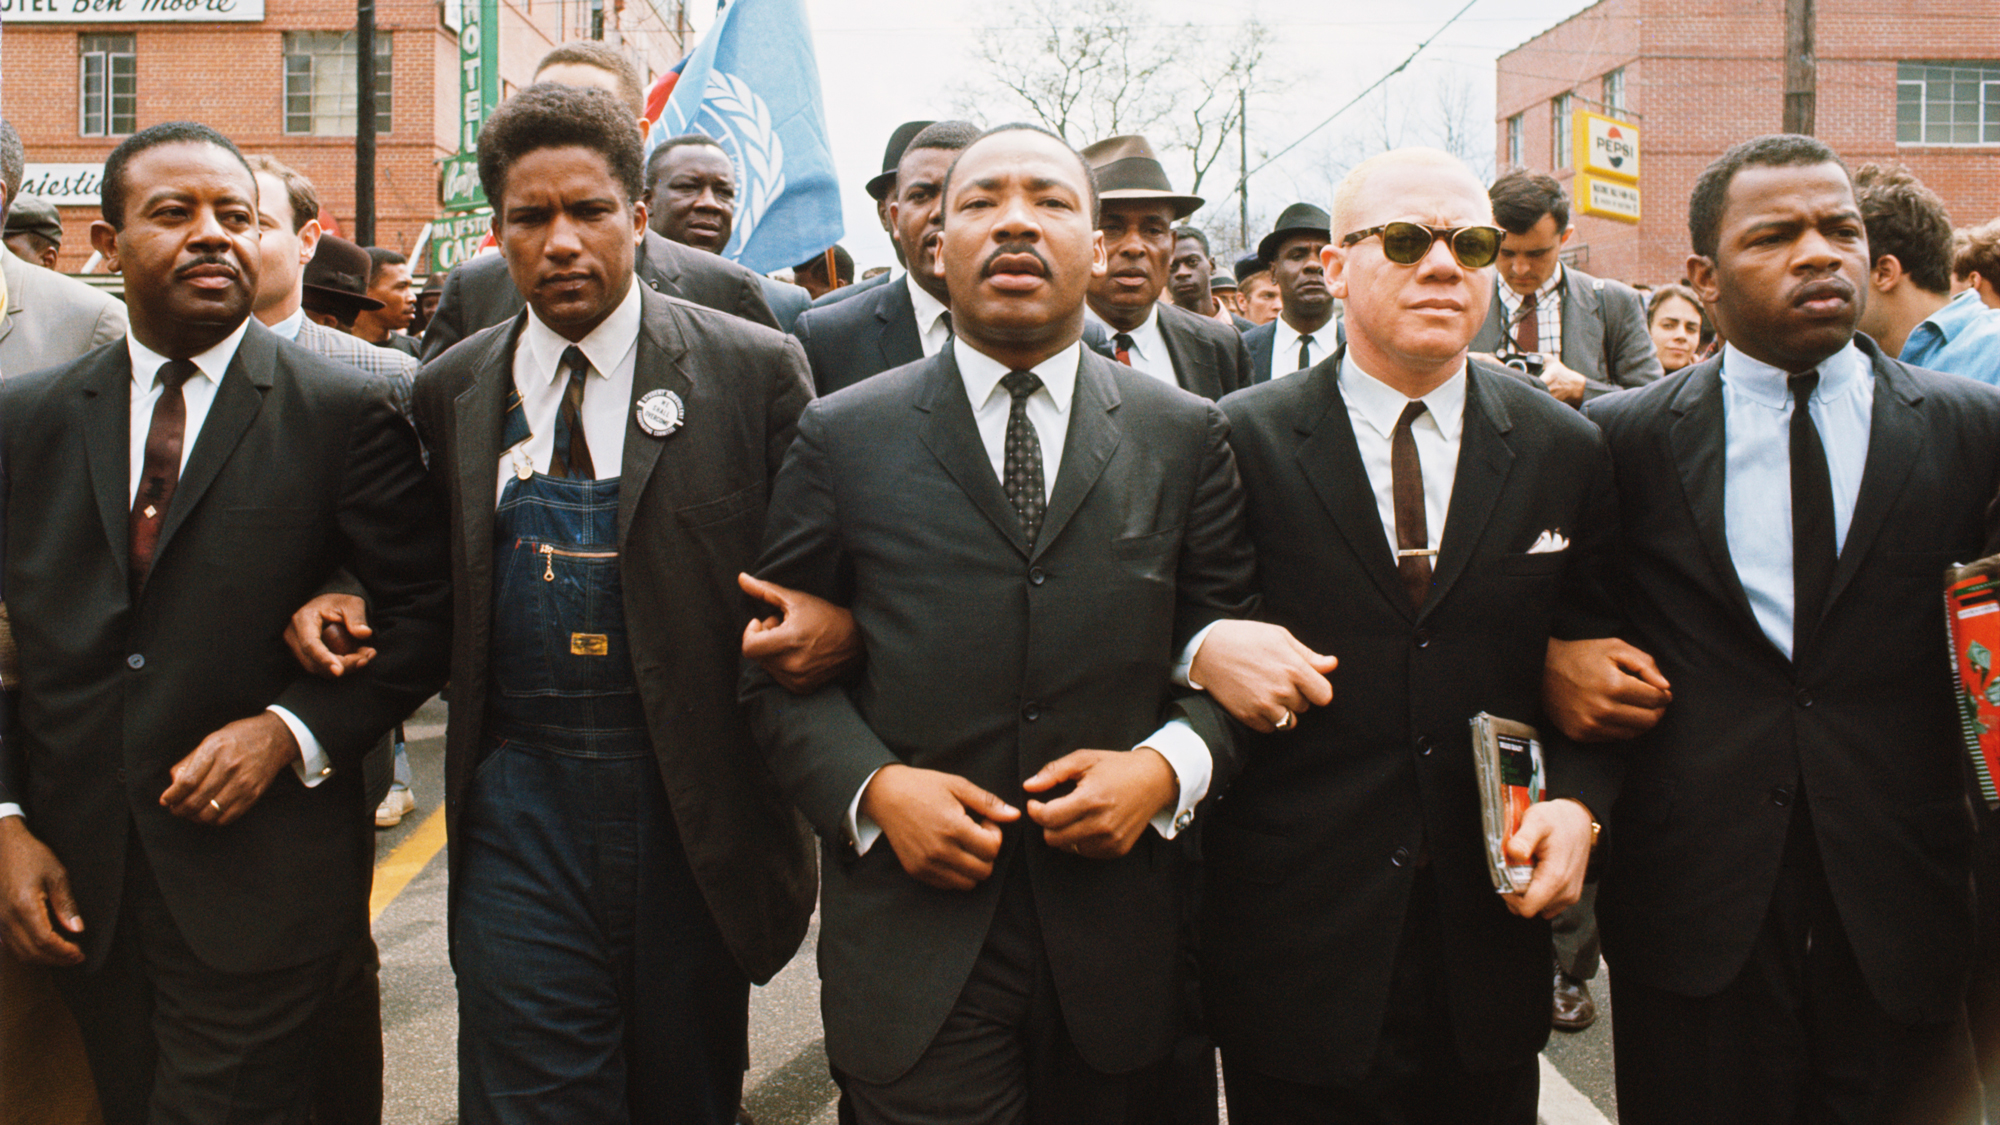 John Lewis King Inspired Me To Get In Trouble The Atlantic